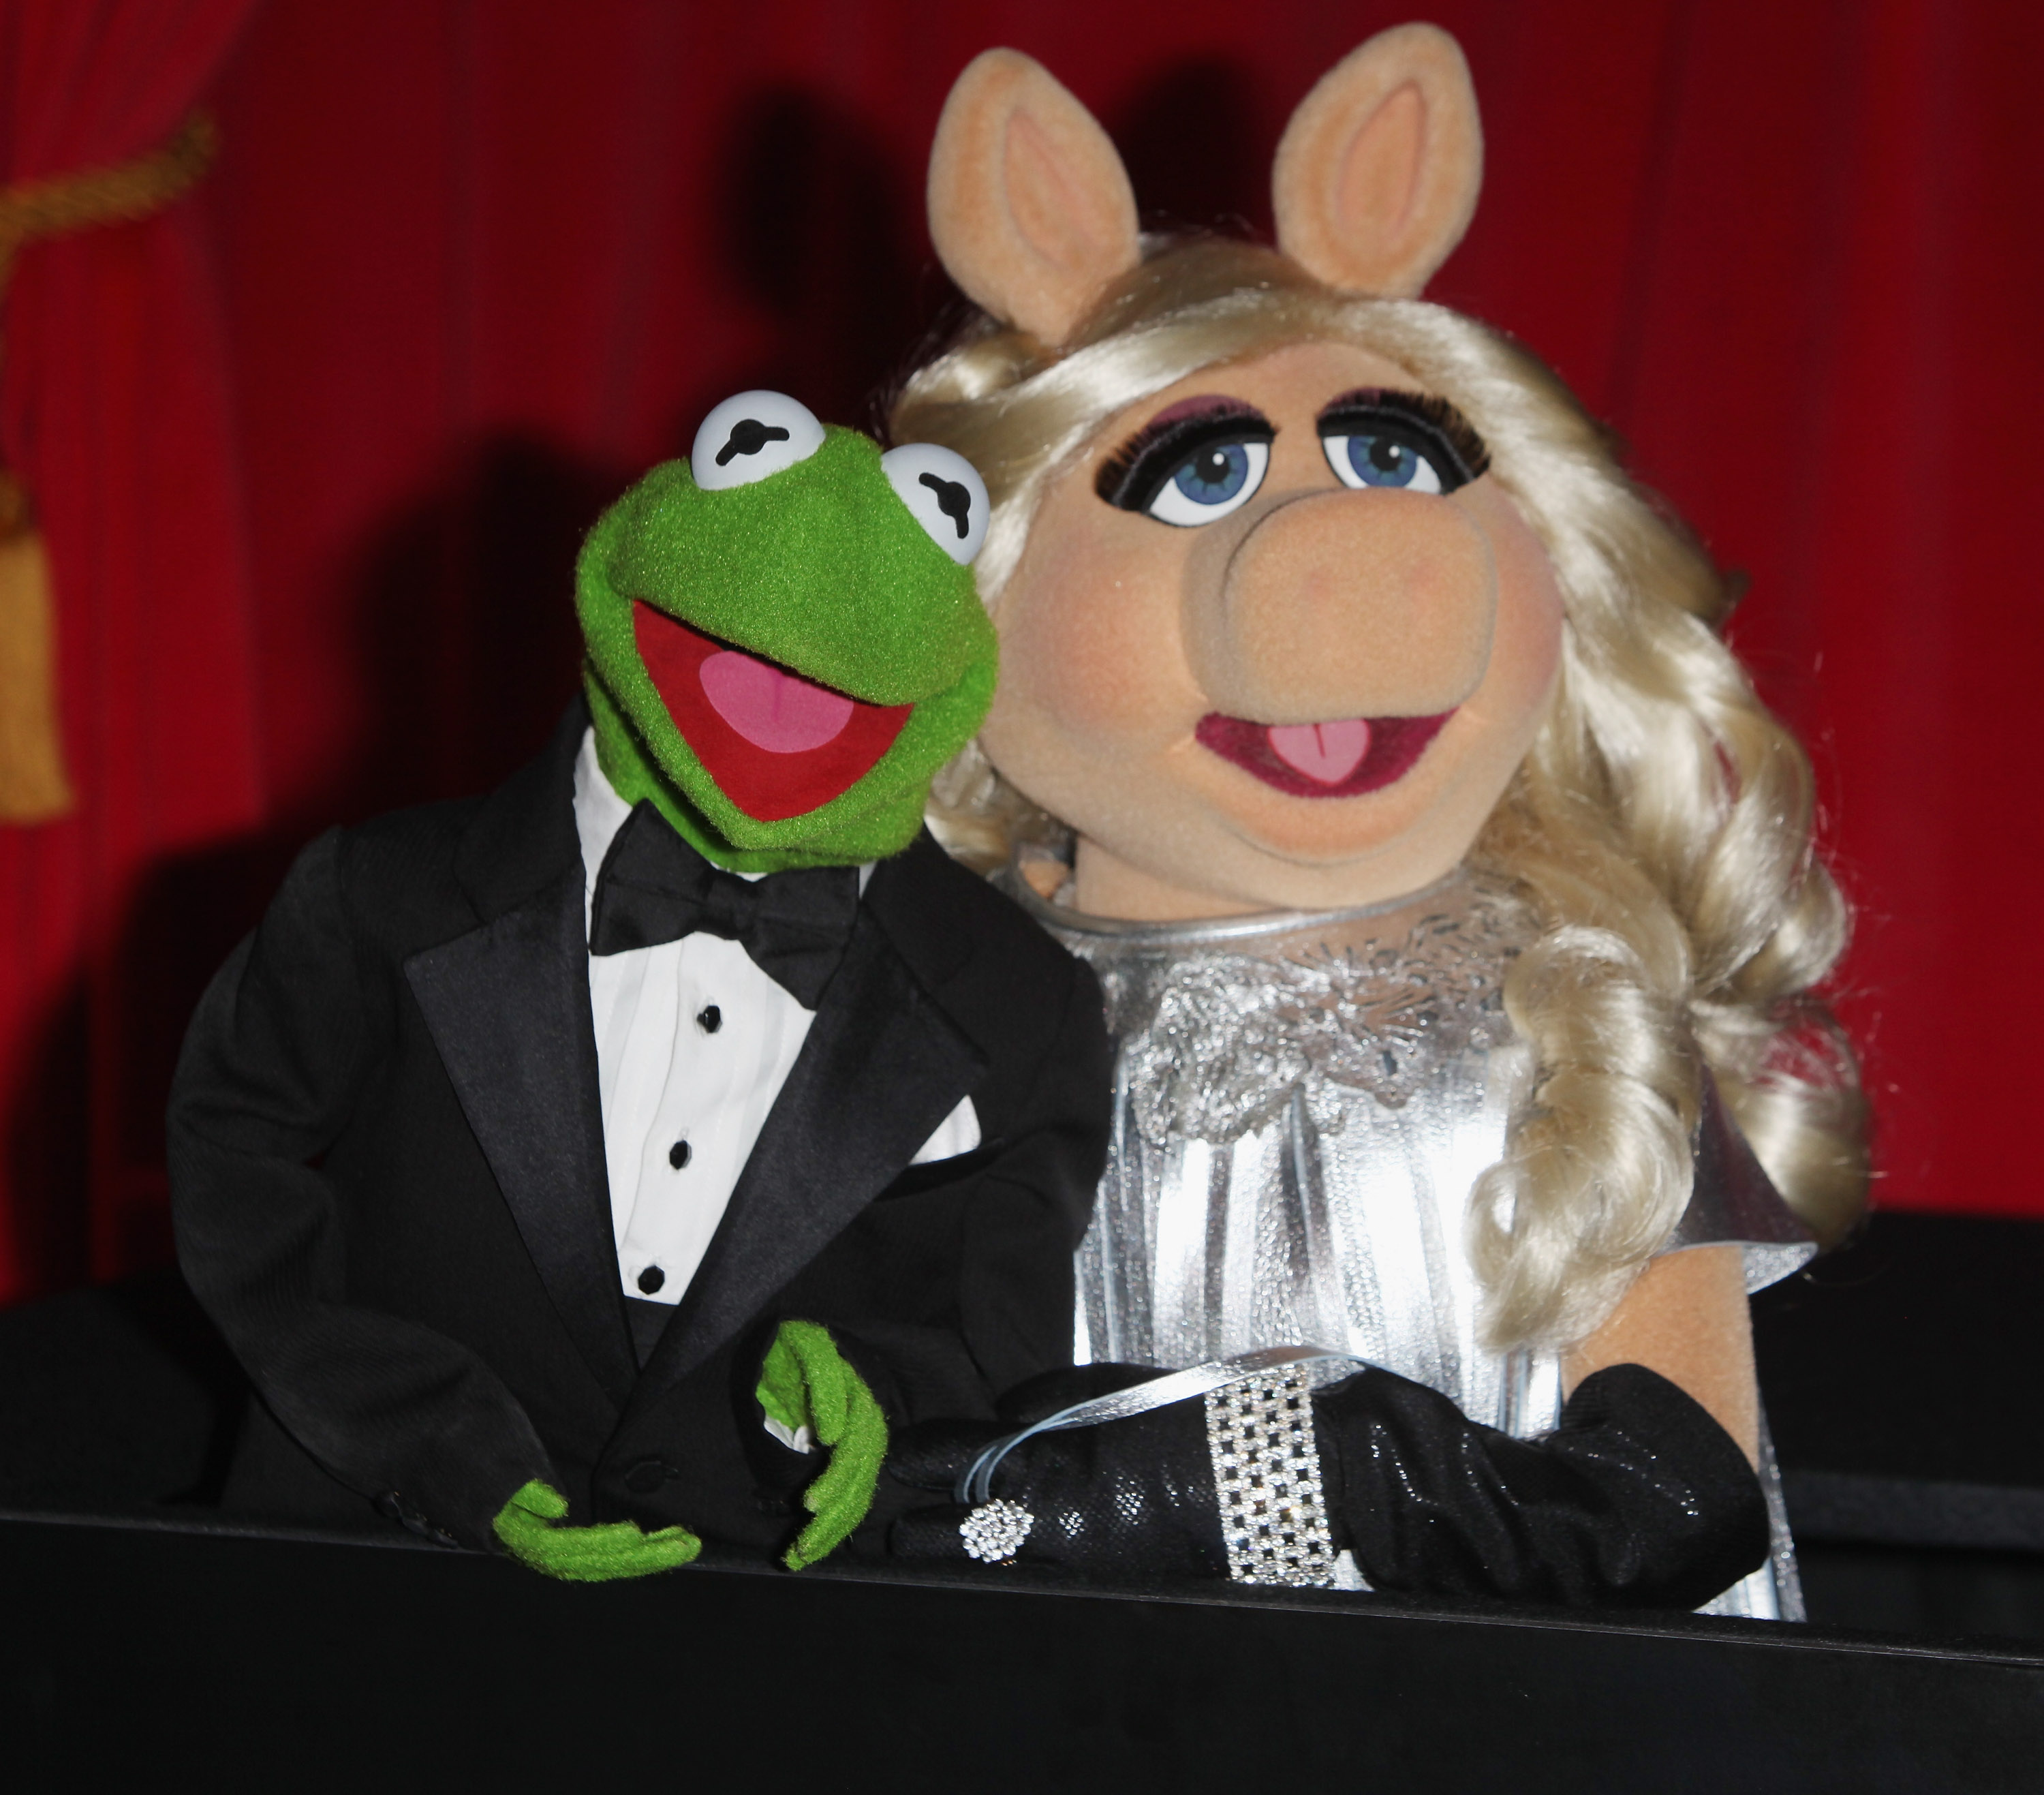 Kermit the Frog and Miss Piggy leaning on each other